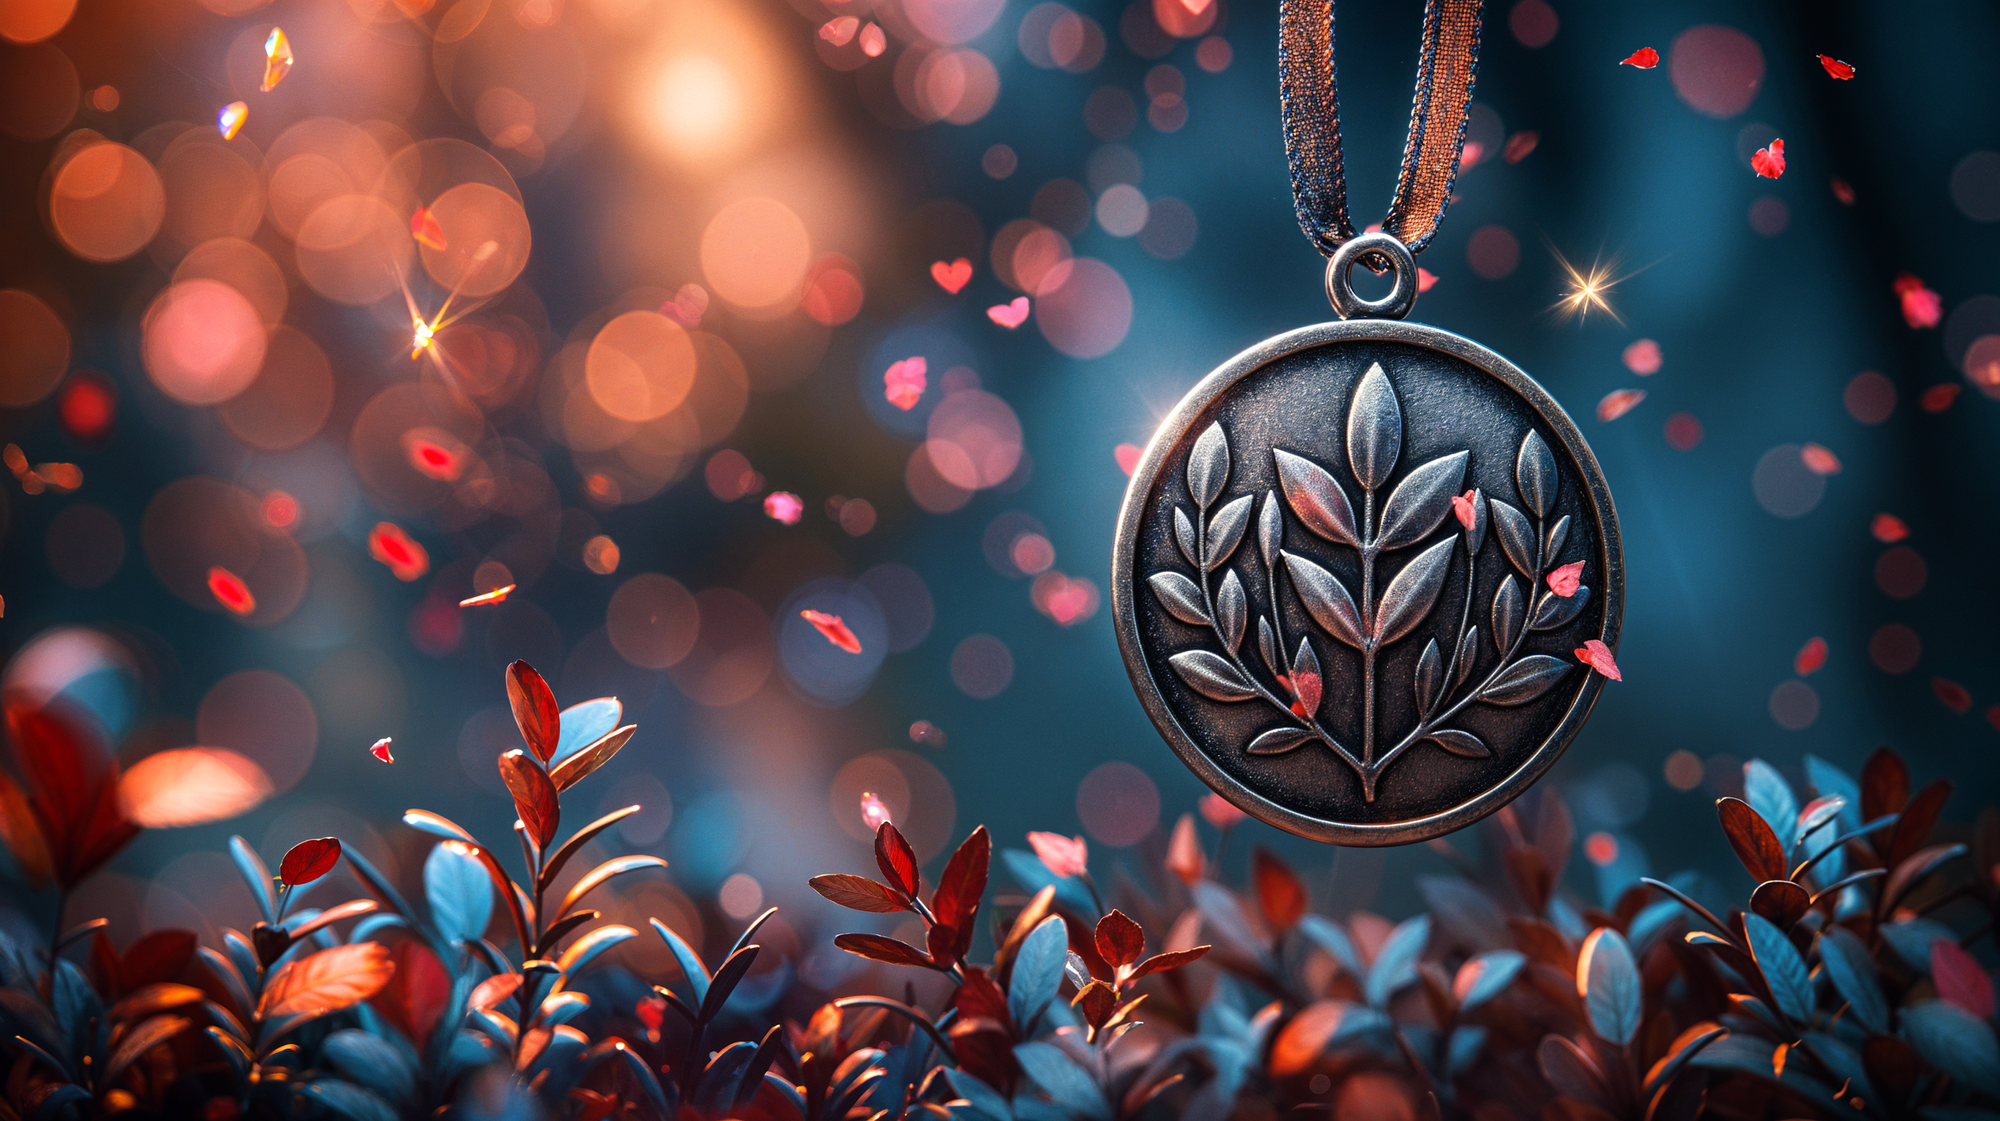 Mysterious medal with silver edges, suspended amidst red particles on a deep blue bokeh background with heart and star-shaped